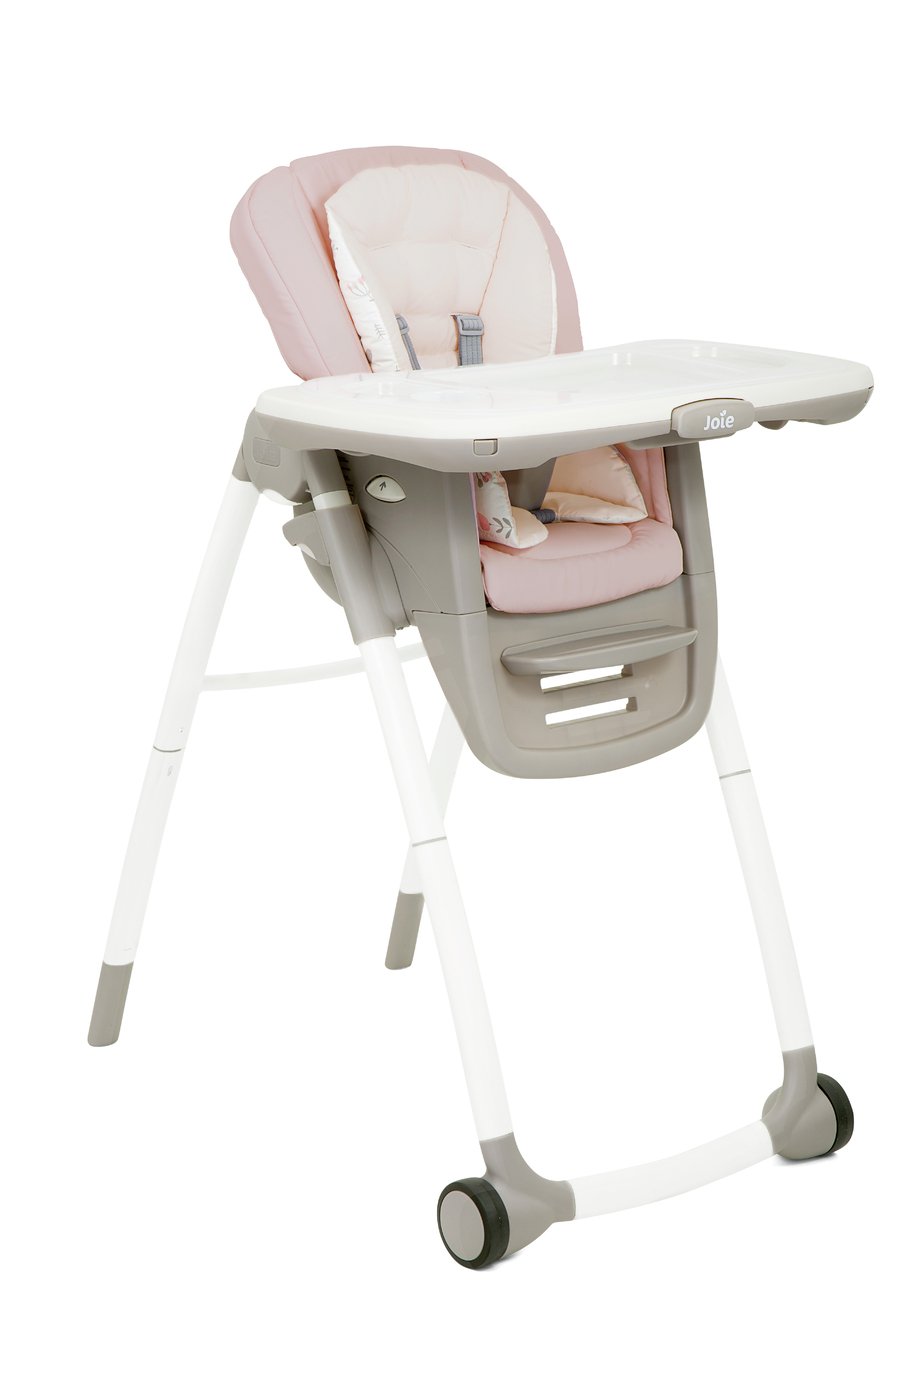 Joie Multiply Highchair Review